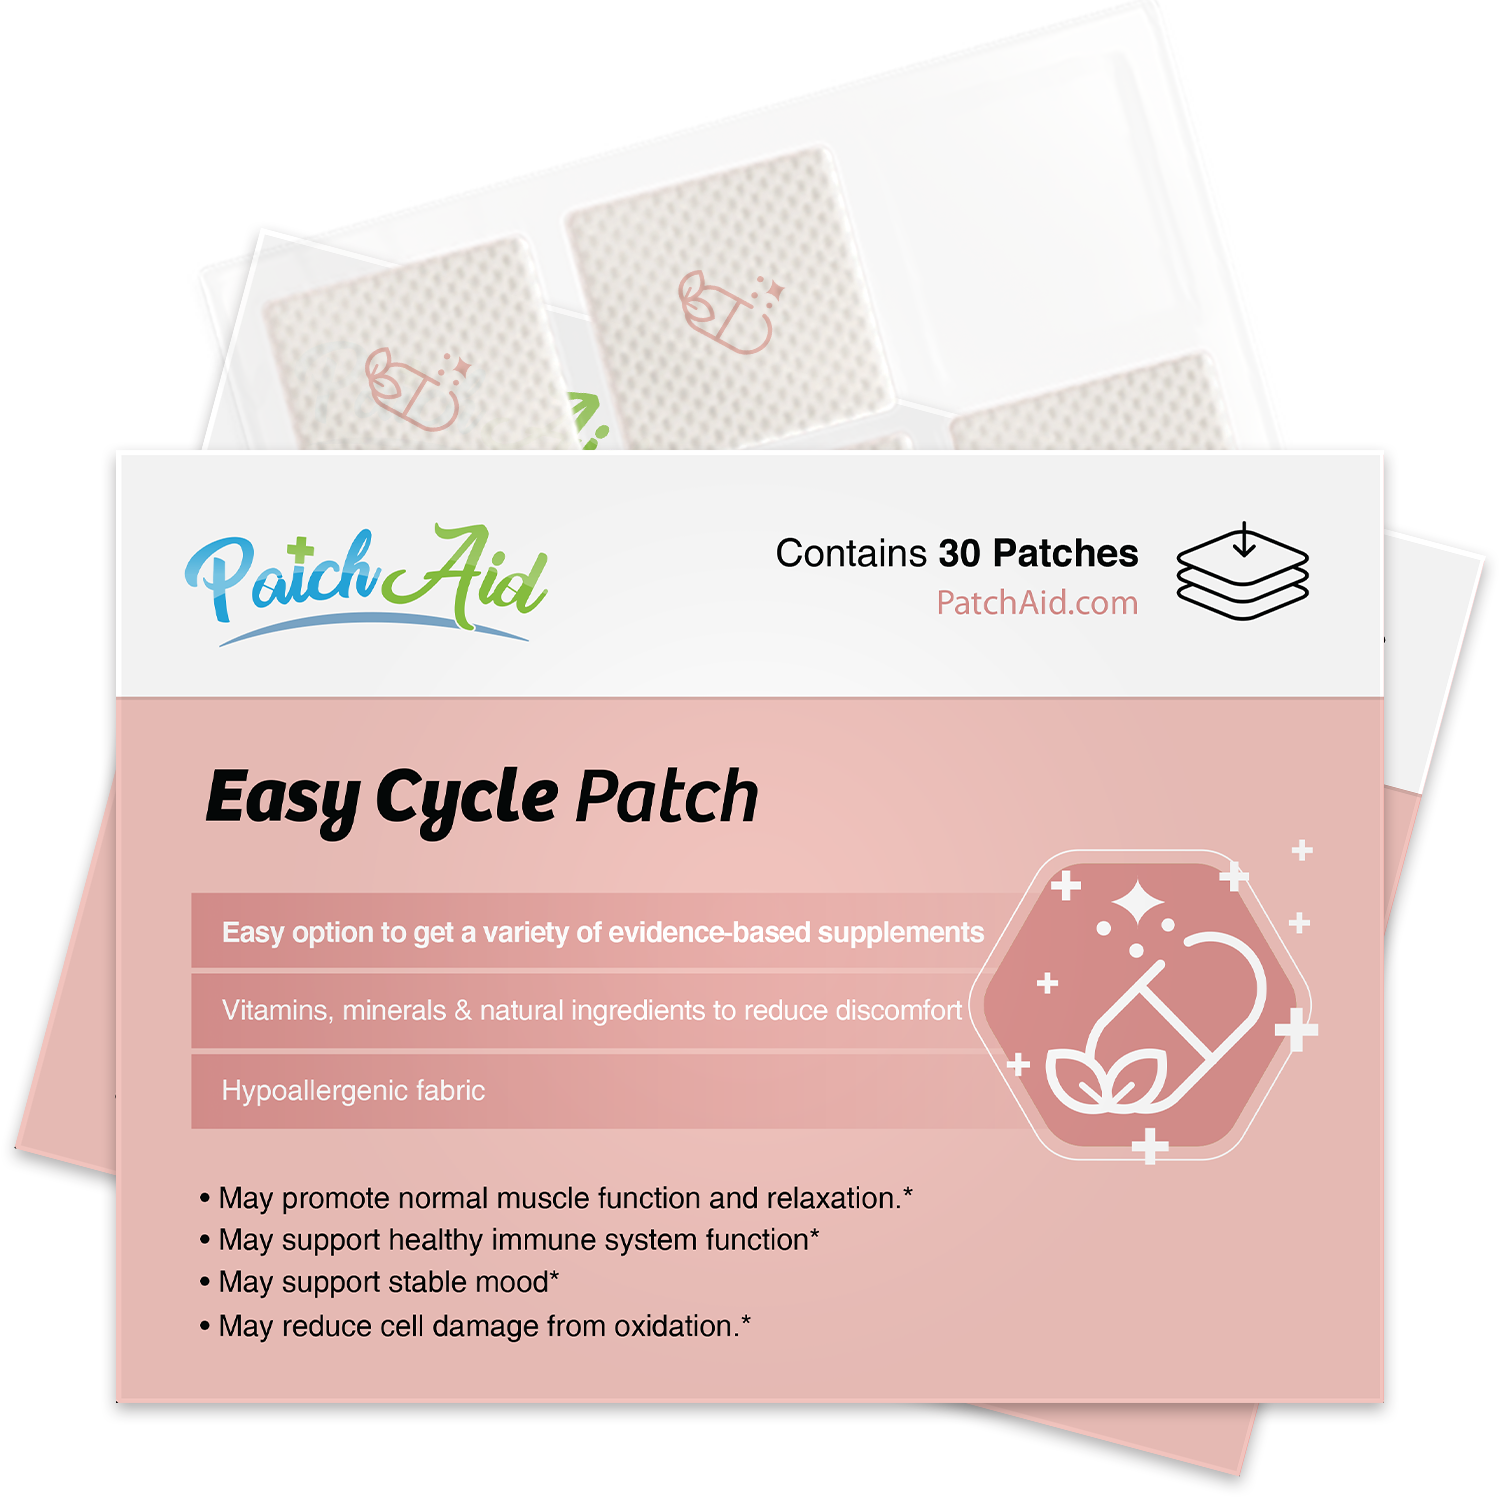 Easy Cycle Patch by PatchAid